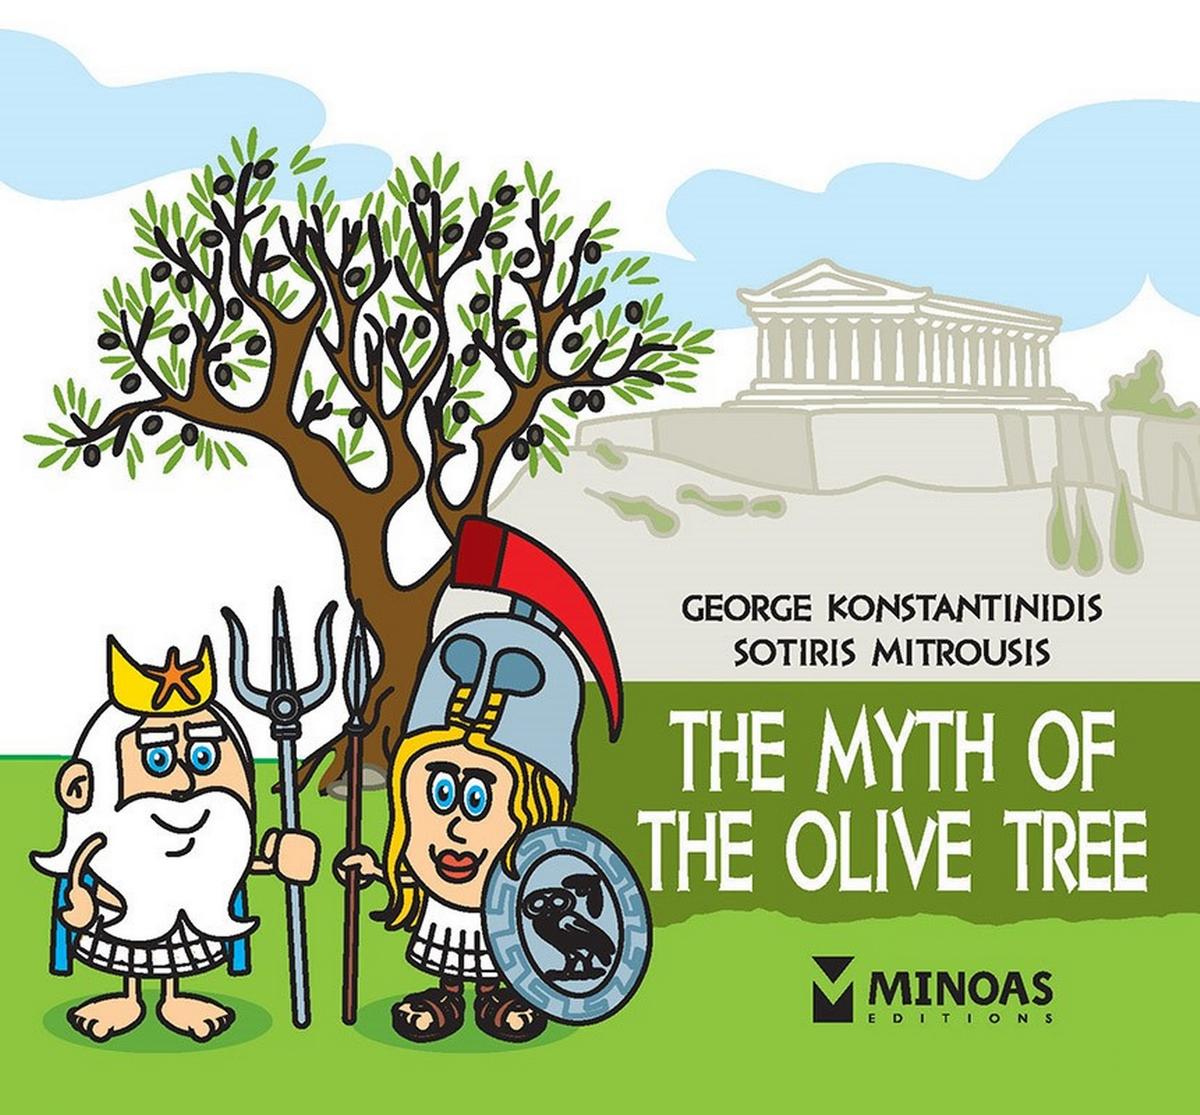 The myth of the olive tree